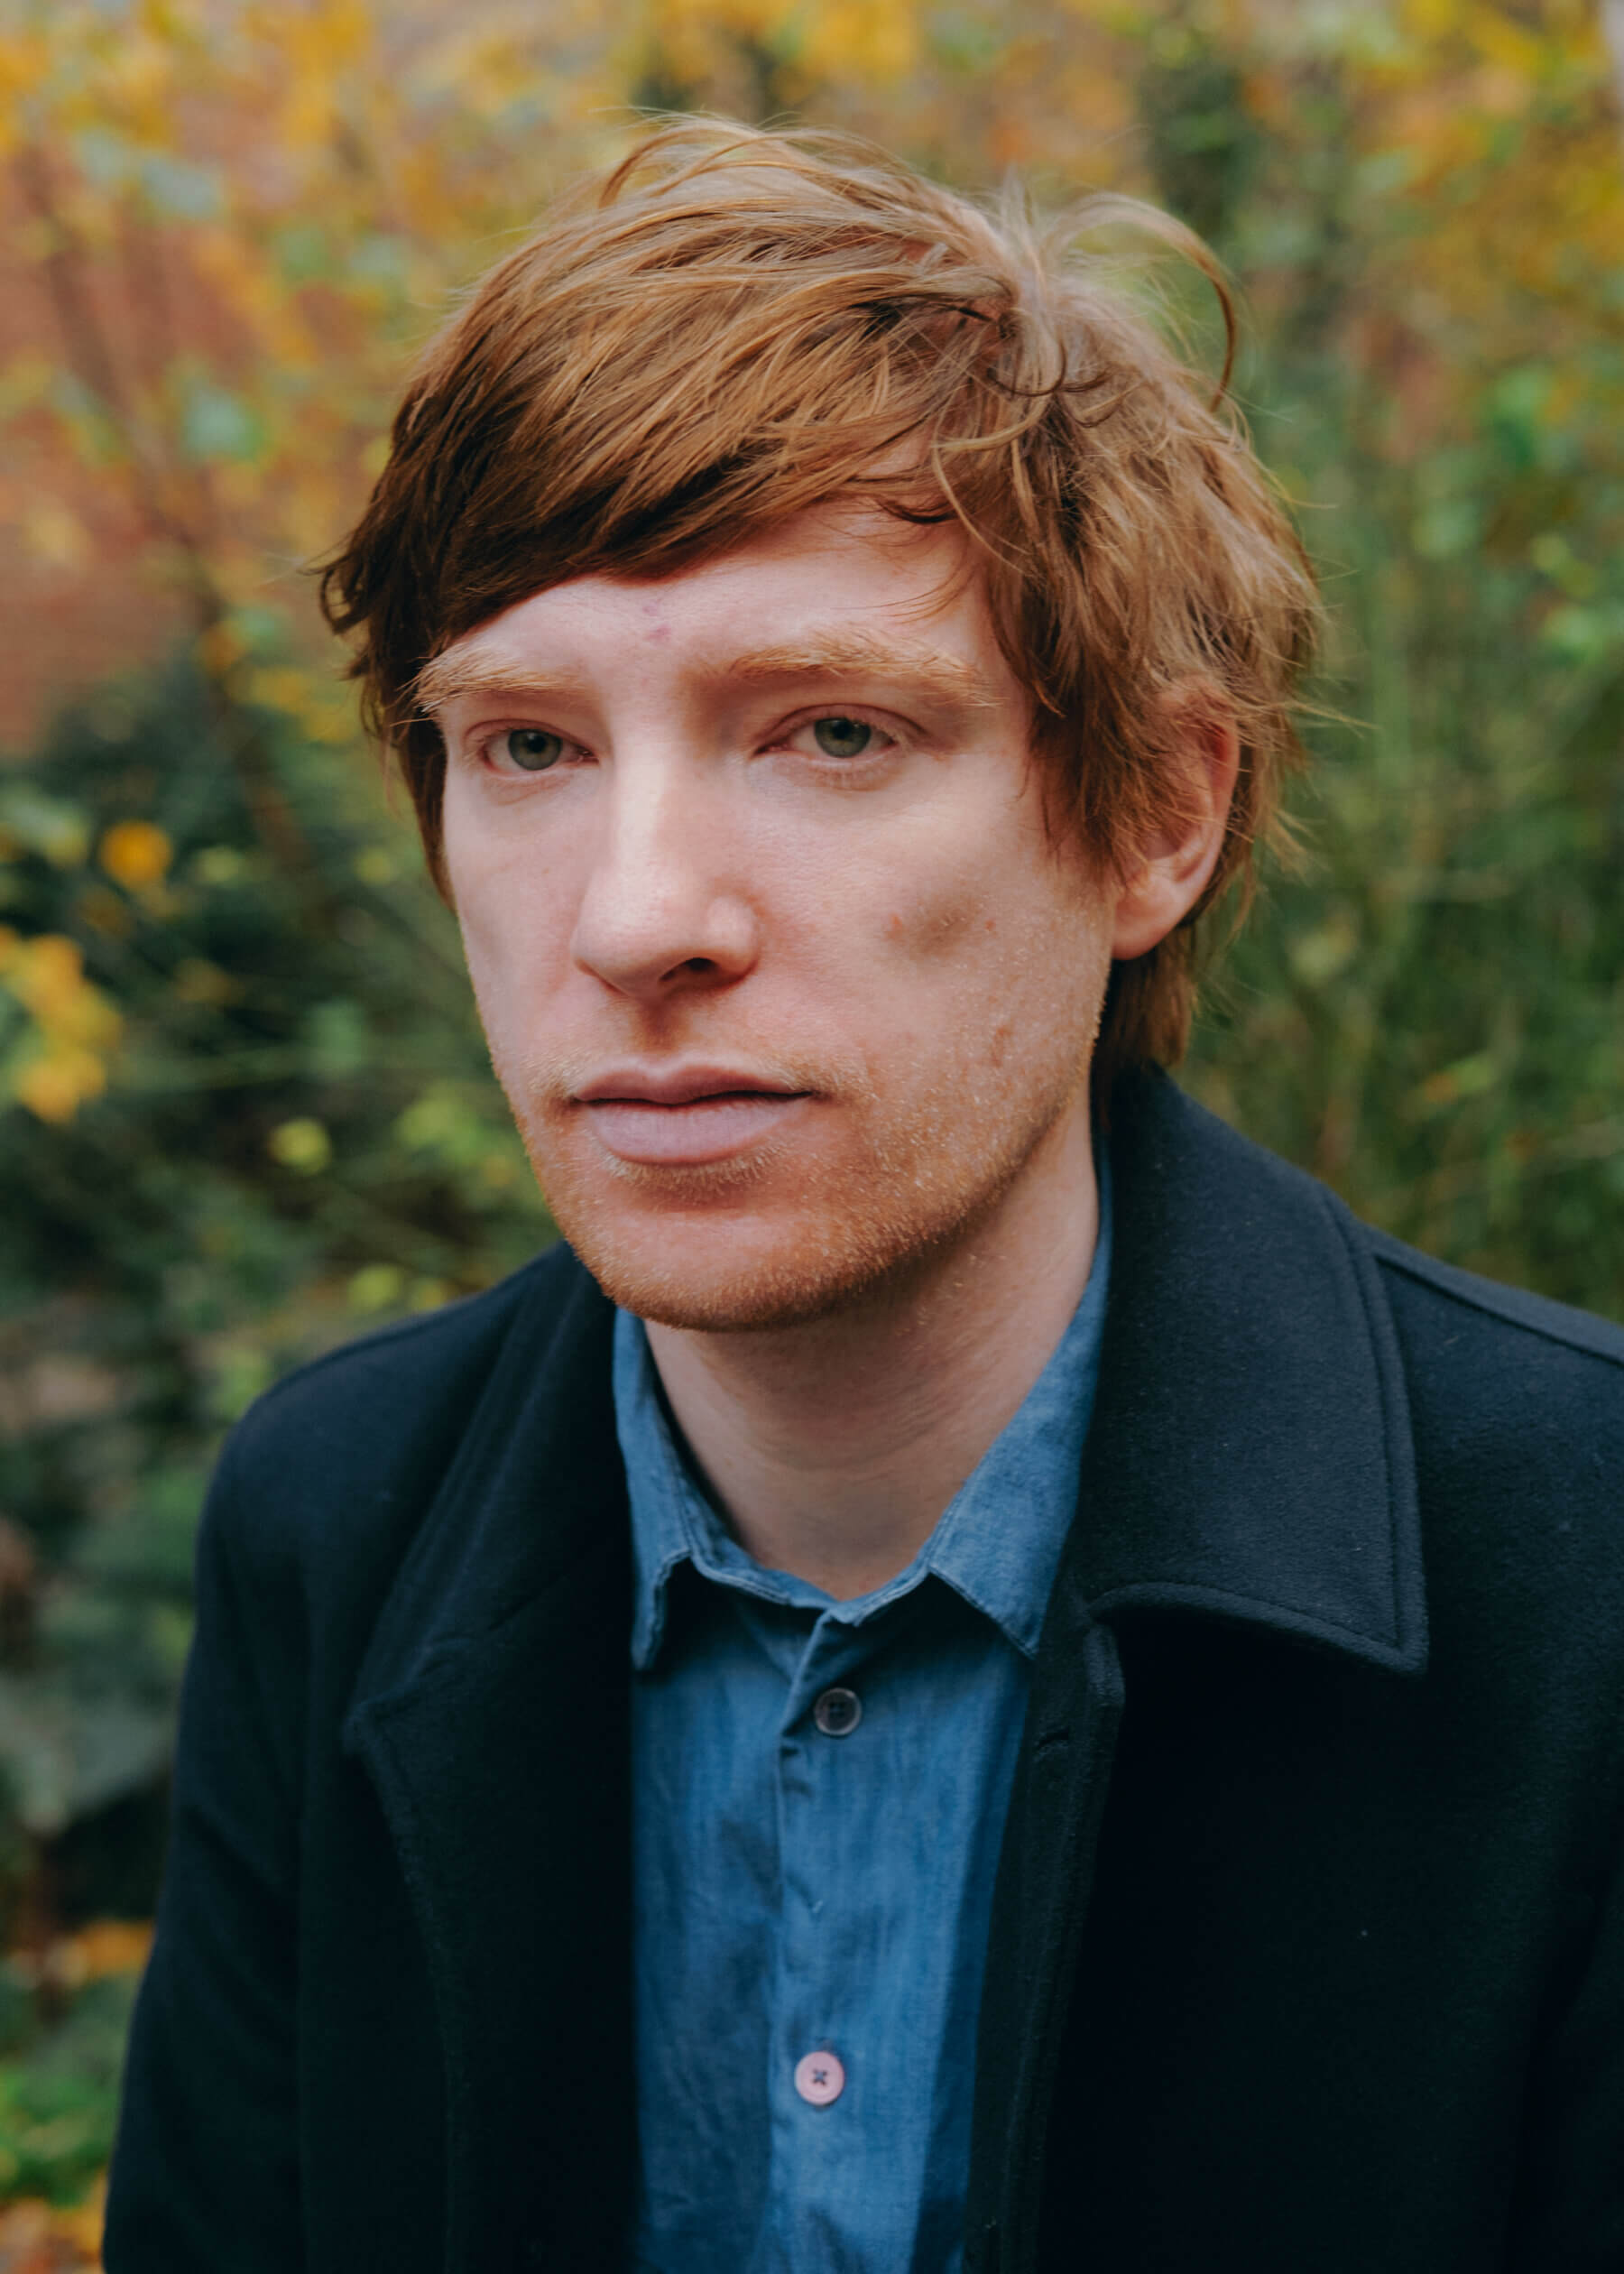 Domhnall Gleeson Birth Chart | Aaps.space